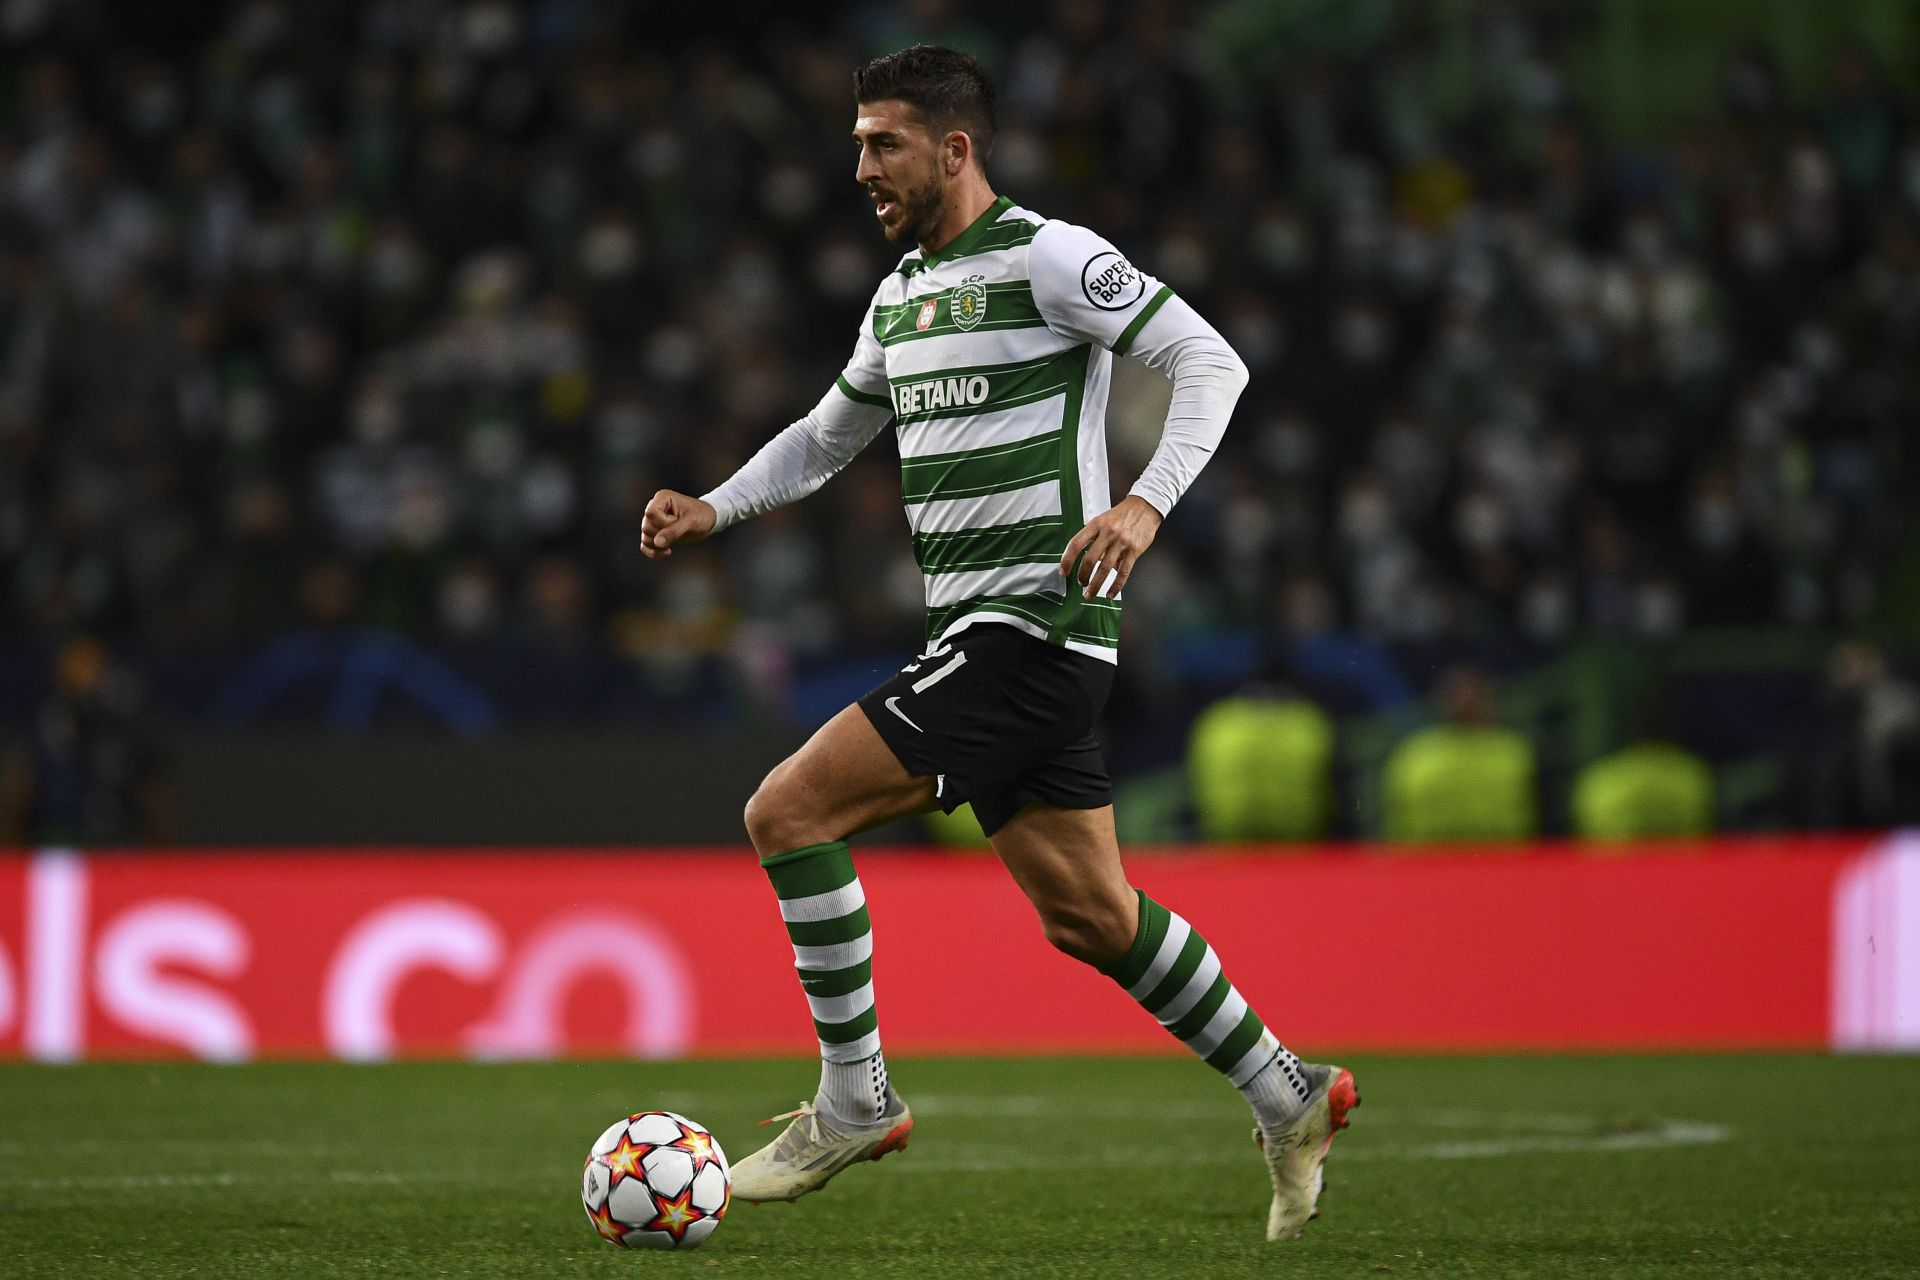 Benfica and Sporting Lisbon clash on Saturday